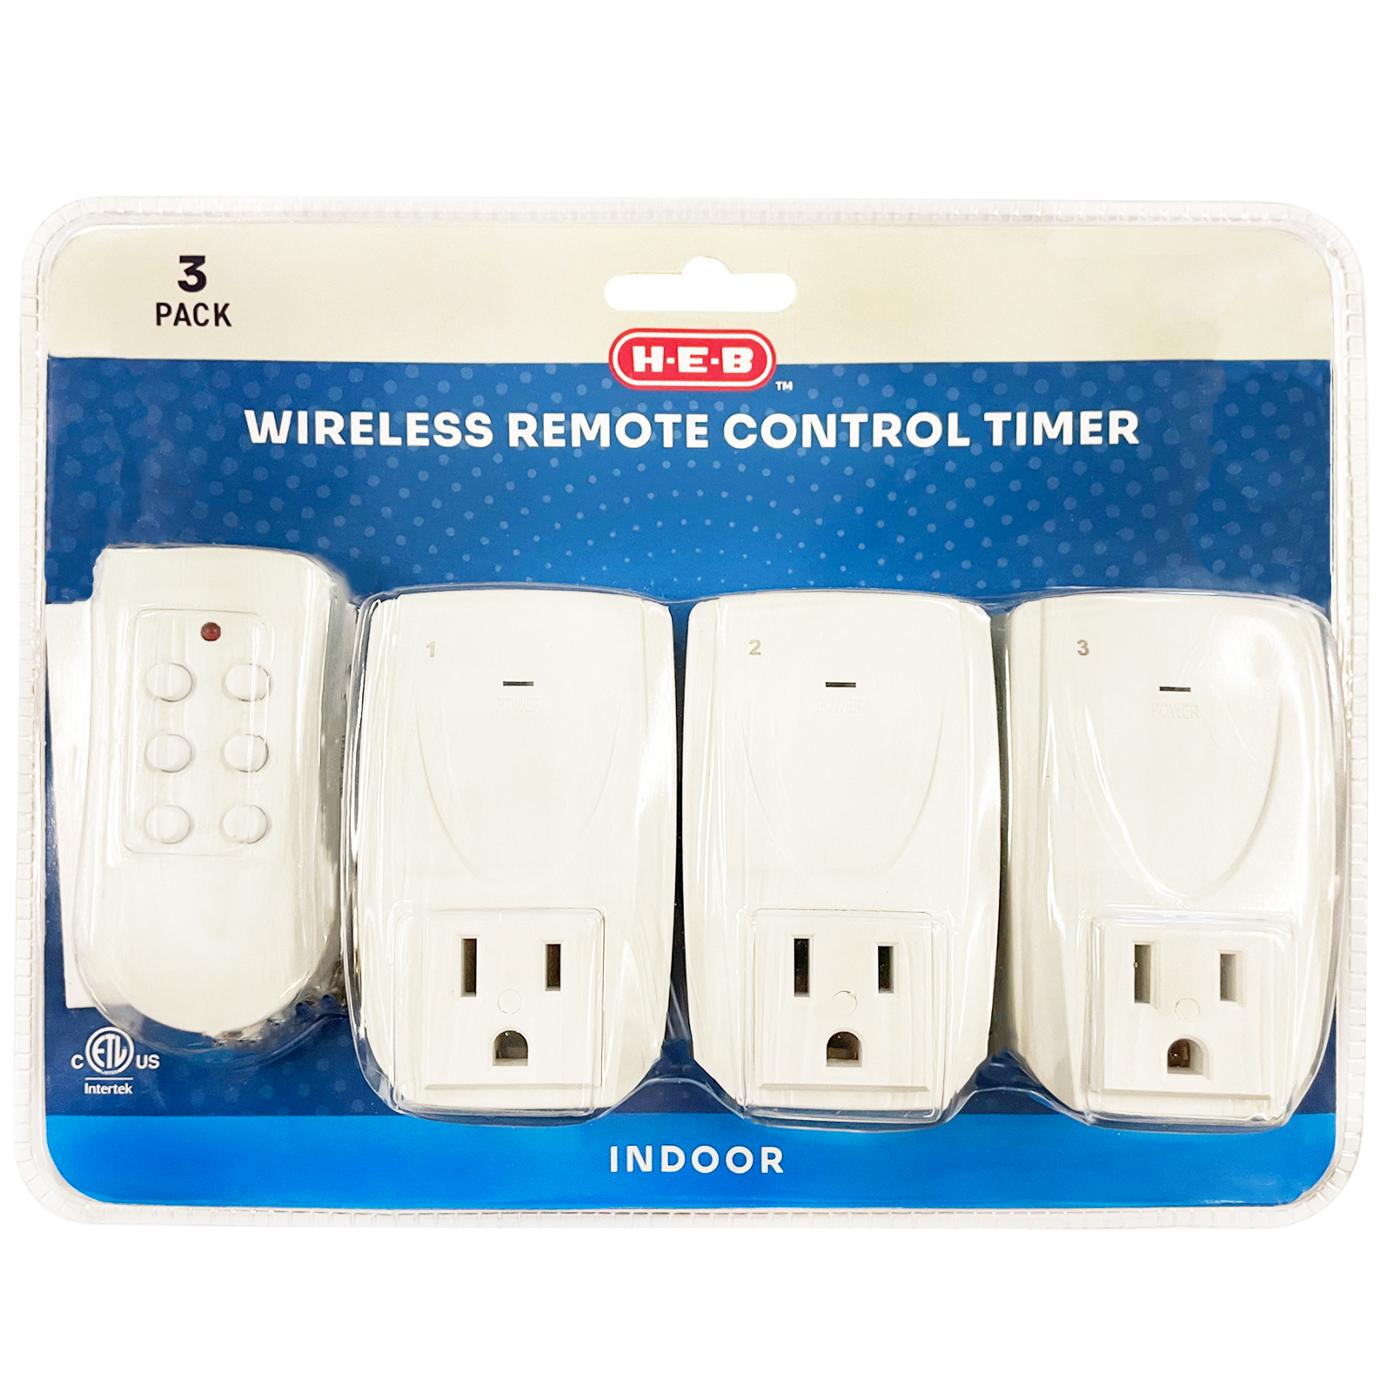 H-E-B Outdoor Wireless Outlet Adapters - Shop Extension Cords at H-E-B